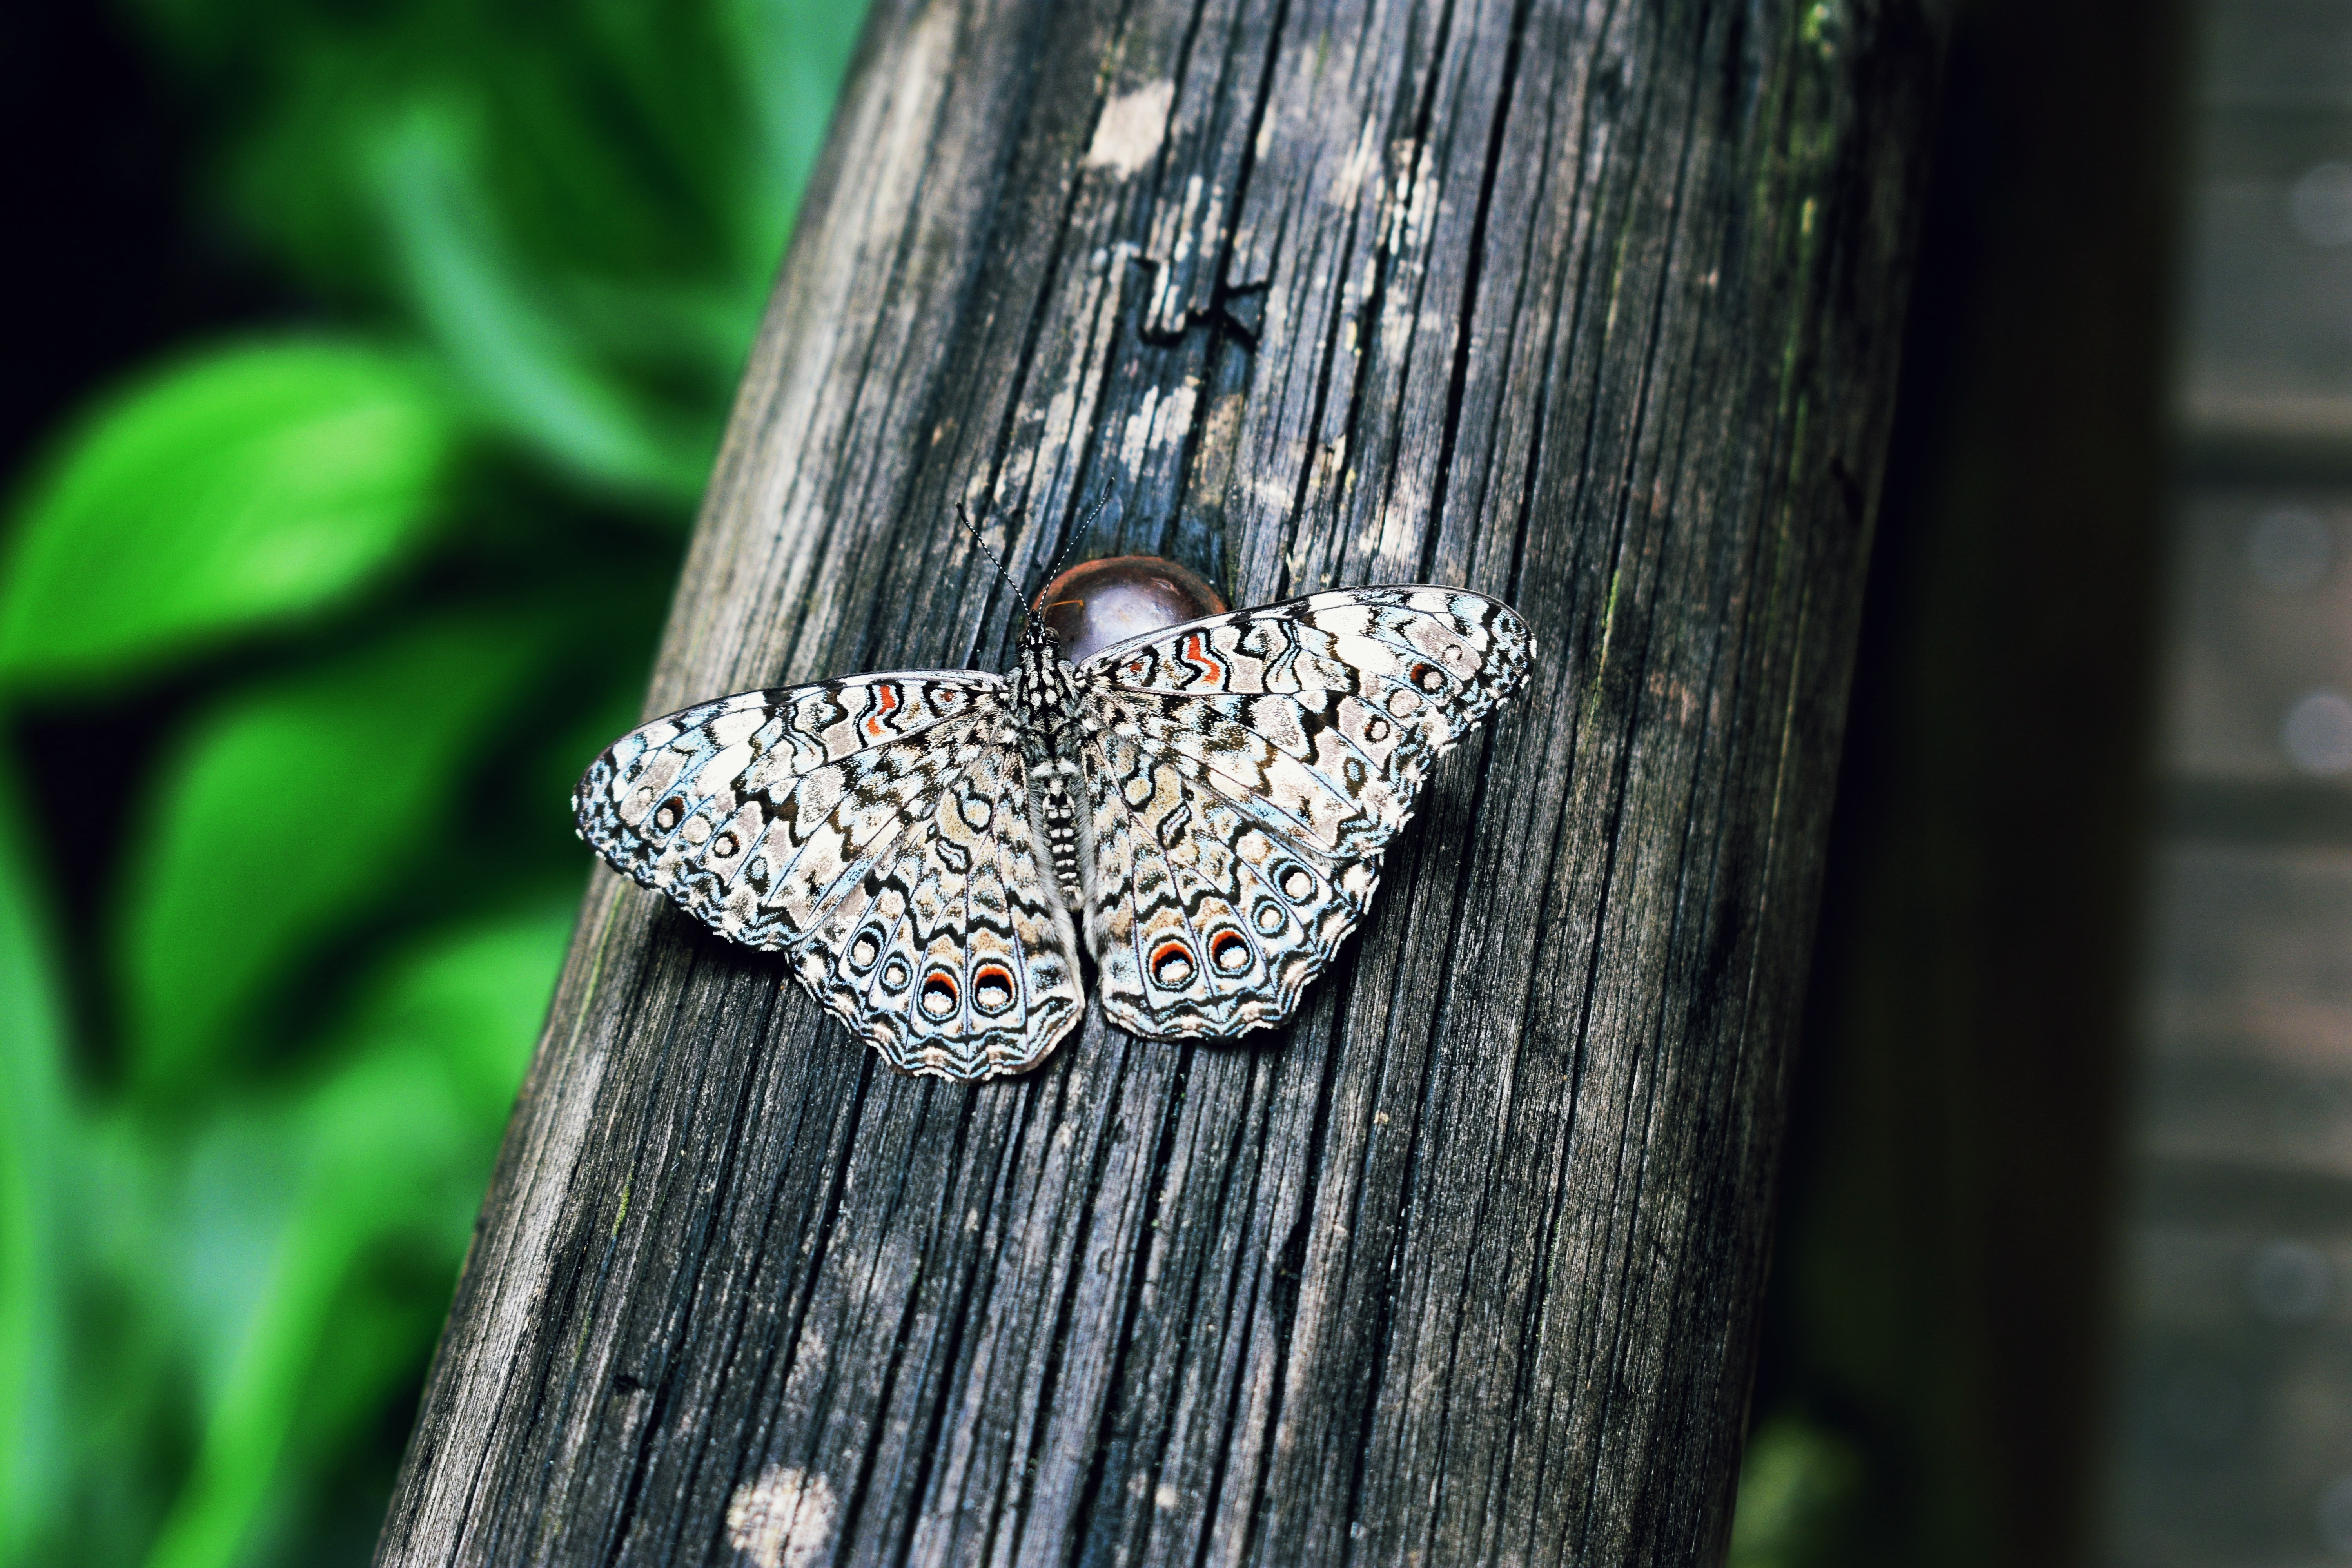 A white butterfly with a beautiful pattern on its wings sits on a wooden log